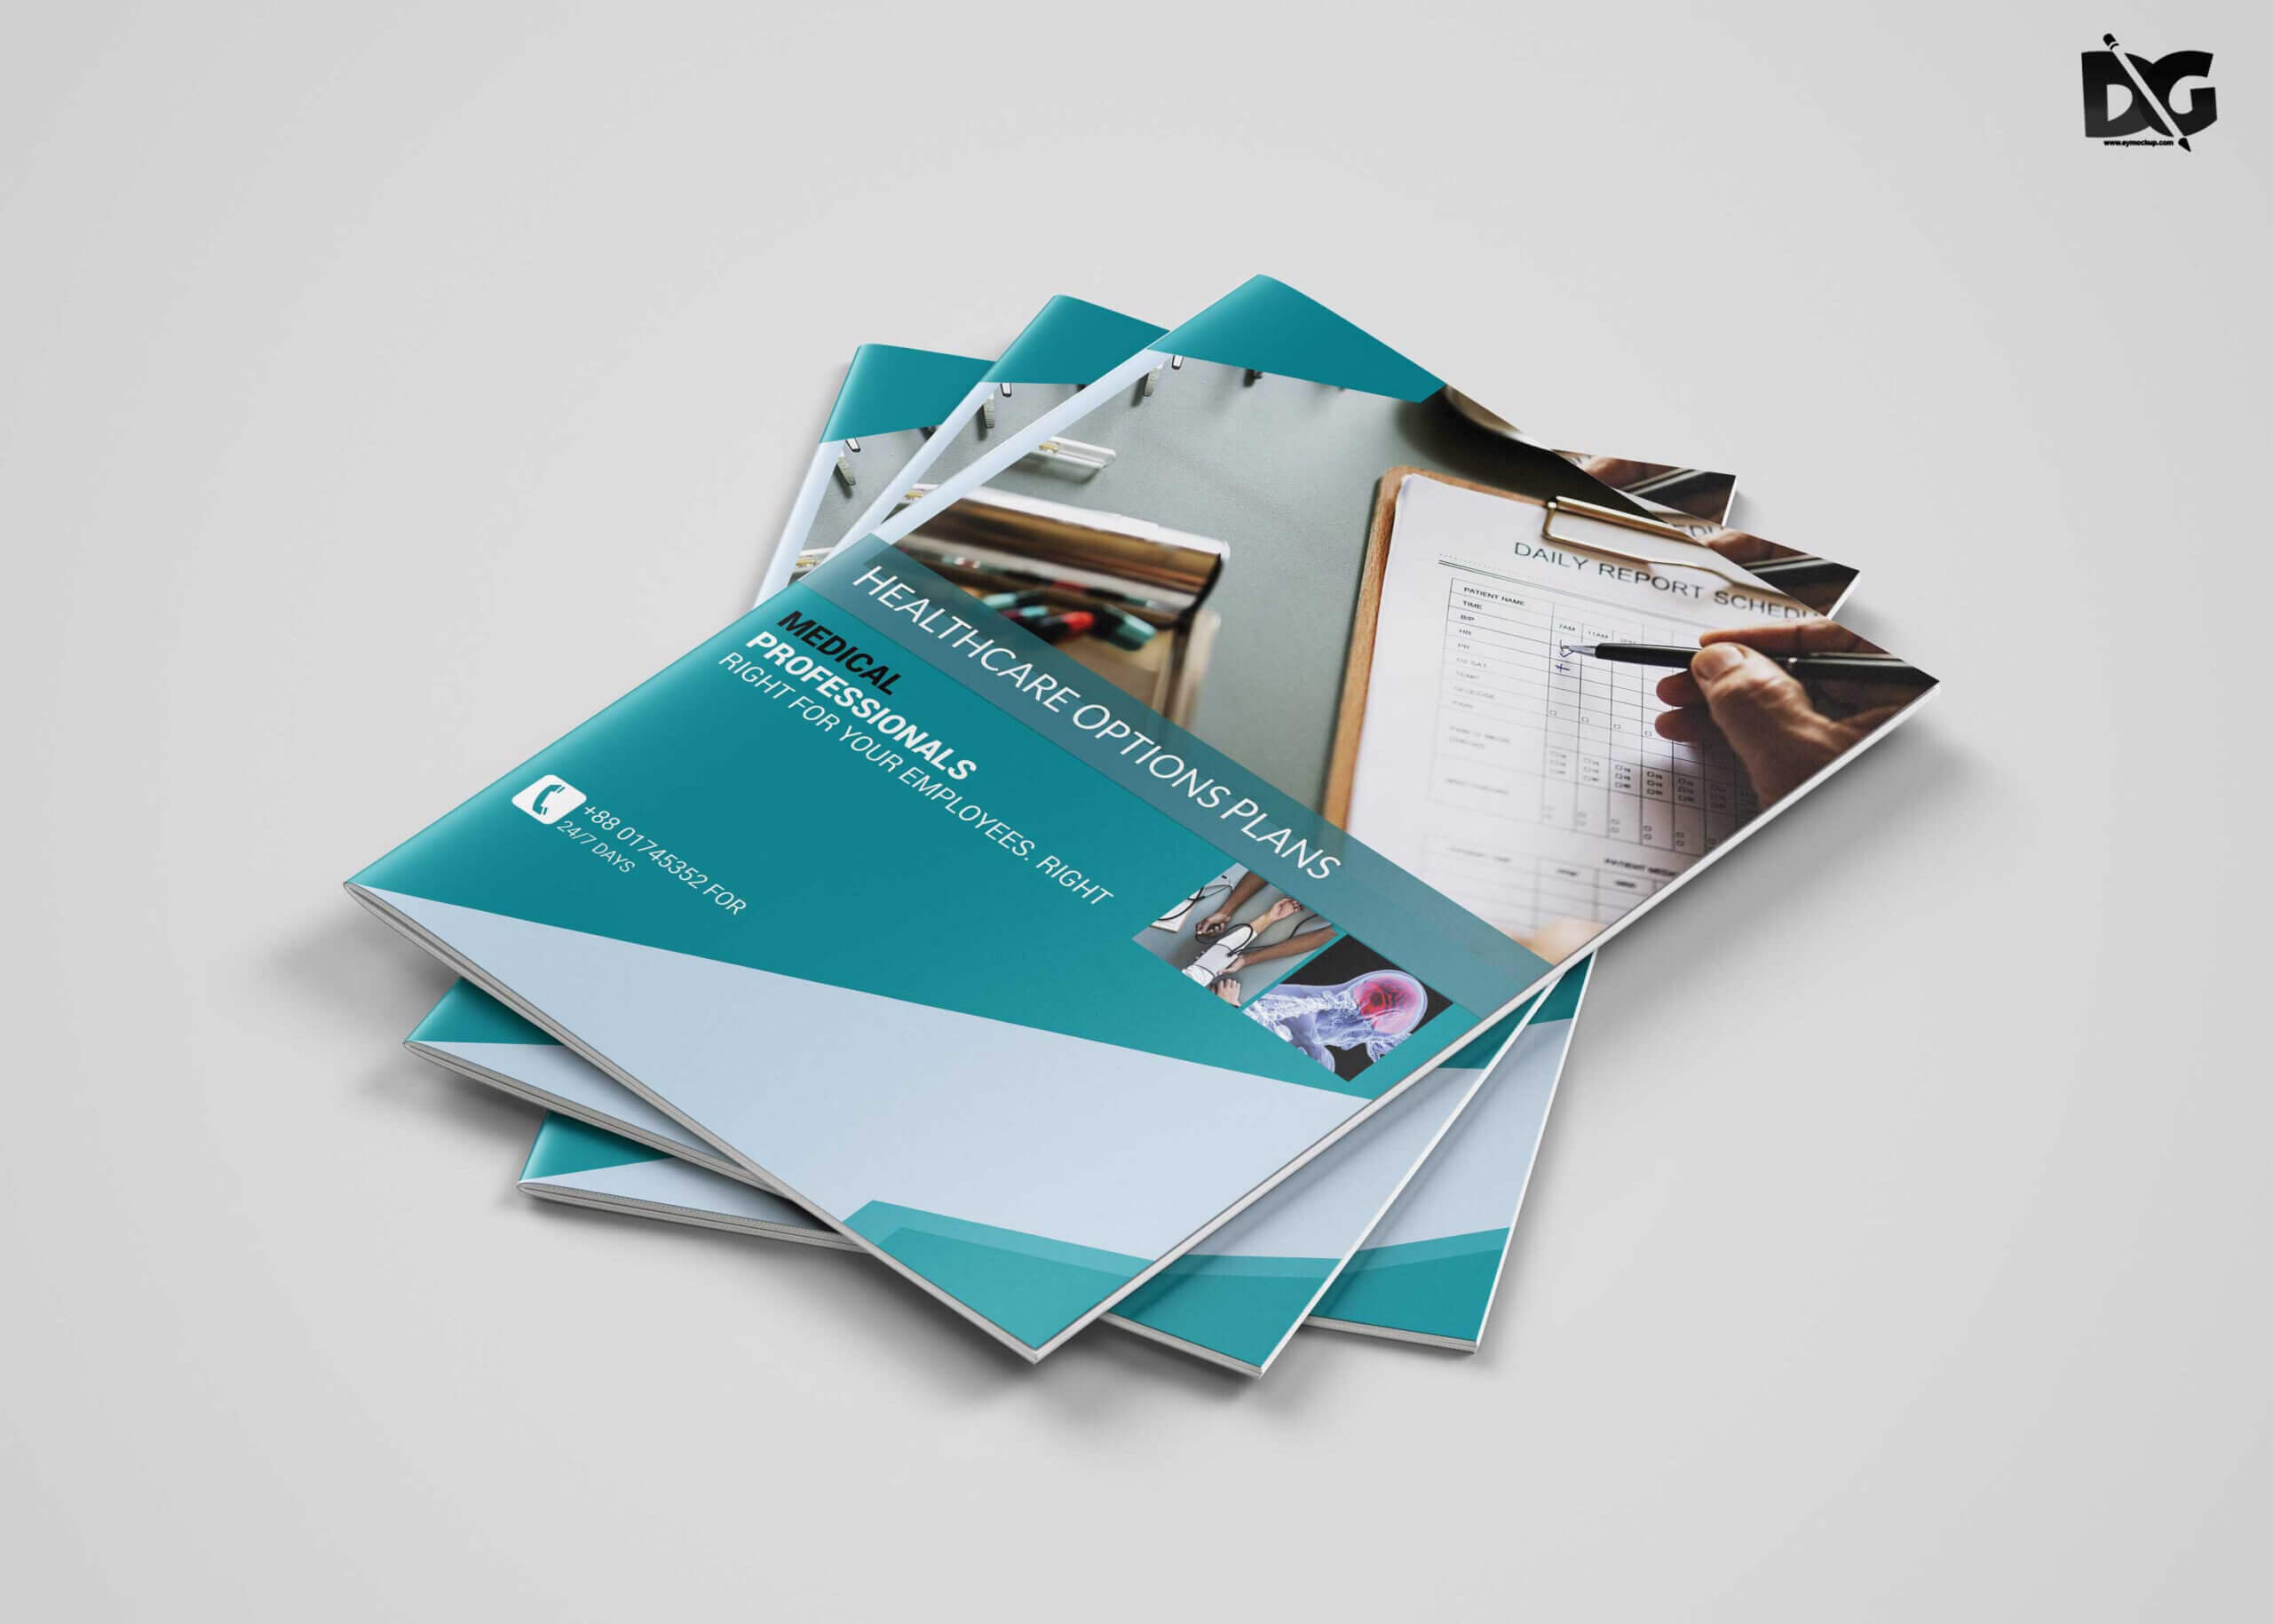 Free Download Health Care A4 Brochure Template | Free Psd With Regard To Healthcare Brochure Templates Free Download